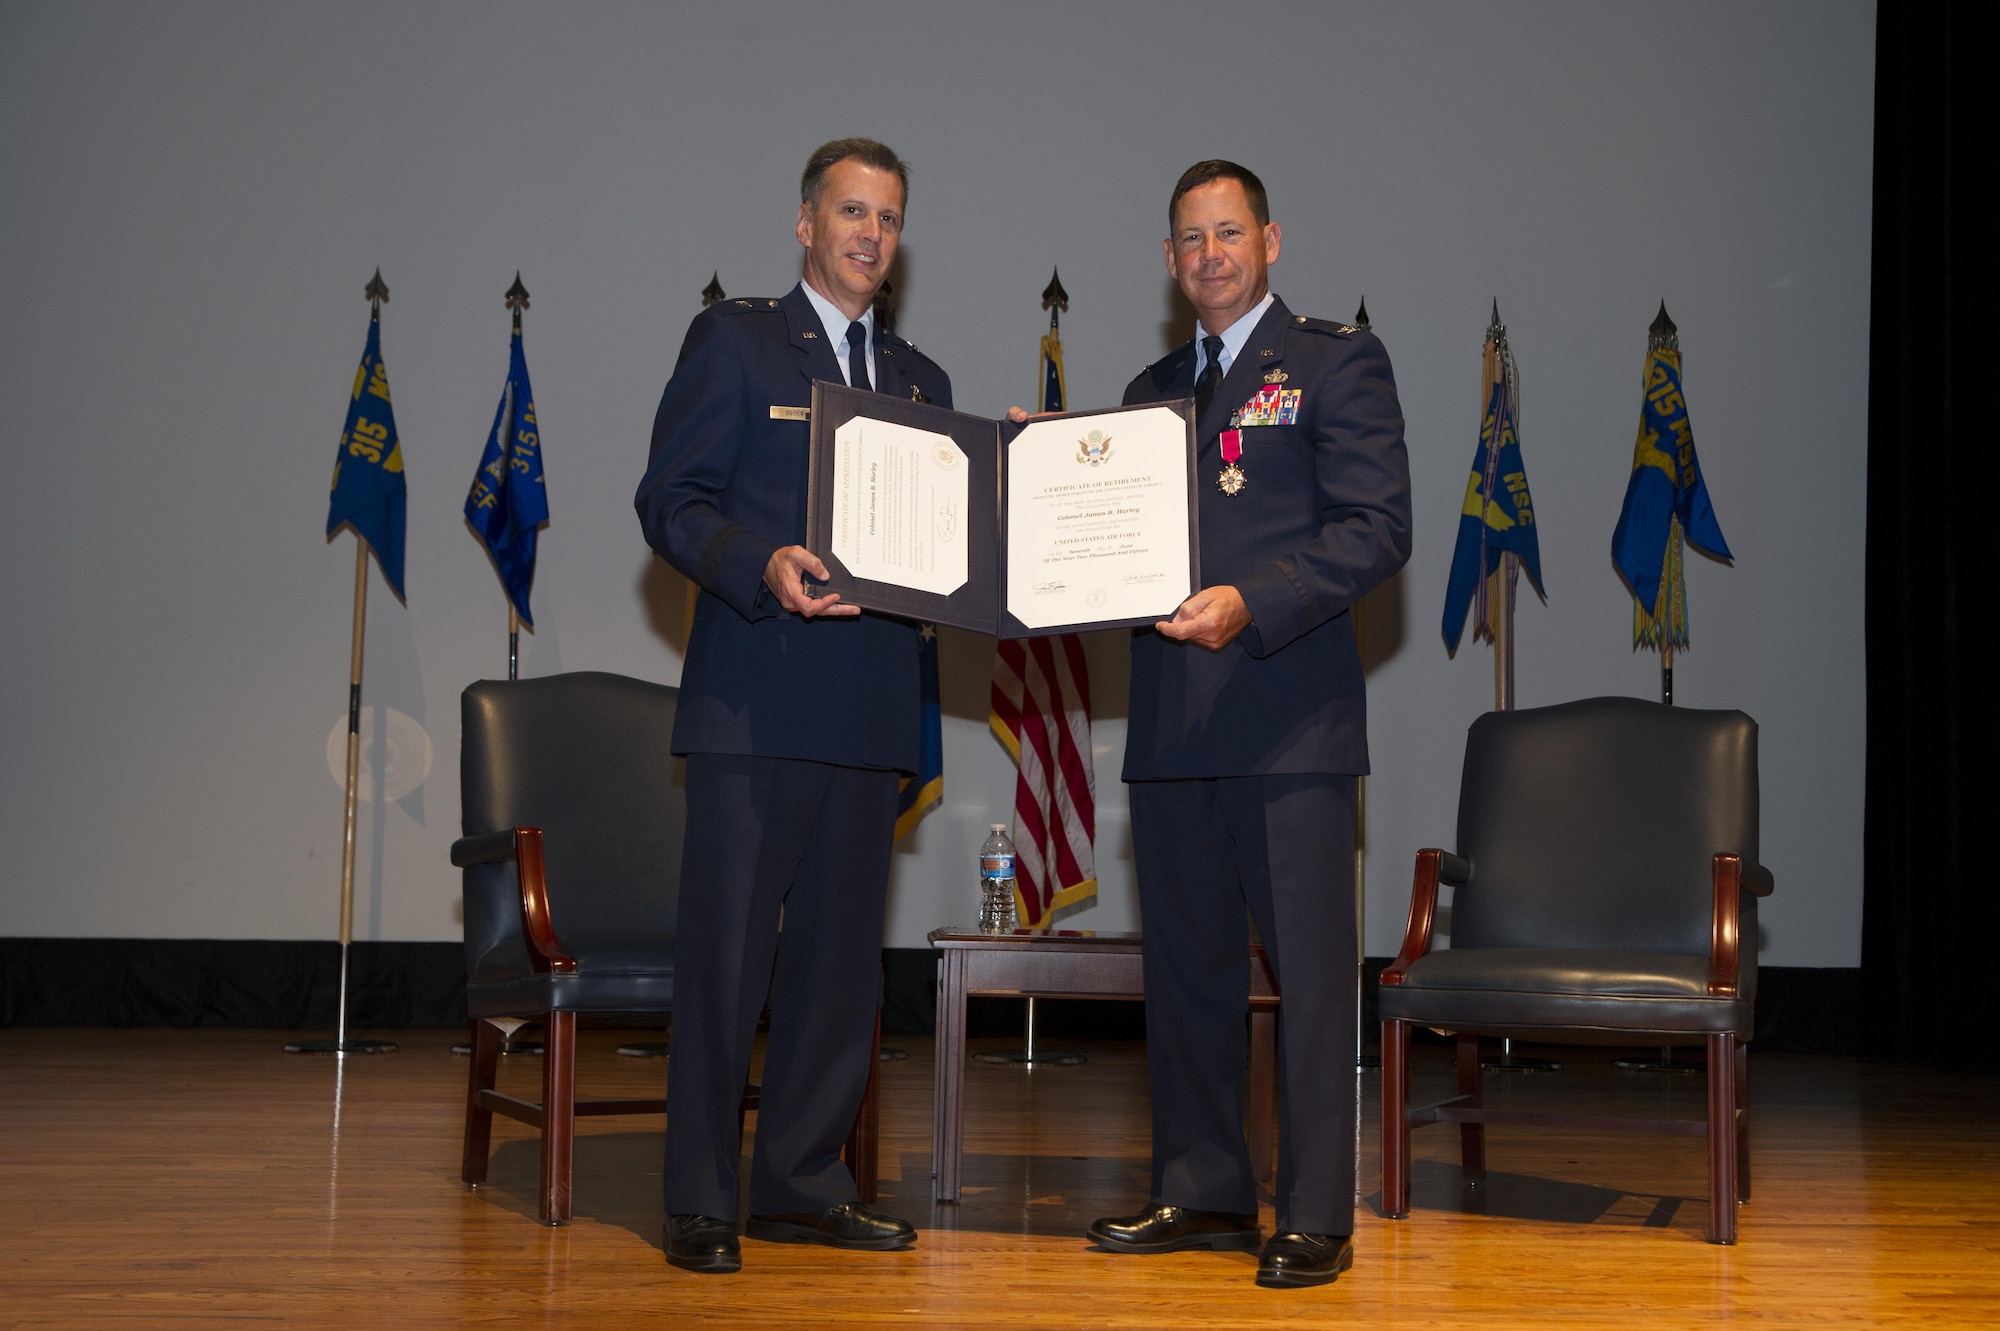 Brig. Gen. Randall A. Ogden presents a certificate of retirement to Col. James B. Hurley June 7, 2015 at the Joint Base Charleston theater in Charleston, S.C. During his 33-33-year career, Hurley first served with the active duty Air Force before transitioning to the Air Force Reserve. Hurley donned the Air Force uniform for the last time but will go on to serve in a civilian capacity with the 628th Air Base Wing Mission Support Group at the base. Hurley was the 315th Mission Support Group commander at Joint Base Charleston, and Ogden is the Director, Air Force Reserve Plans, Programs and Requirements, Headquarters U.S. Air Force. (U.S. Air Force Photo by Tech. Sgt. Shane Ellis)